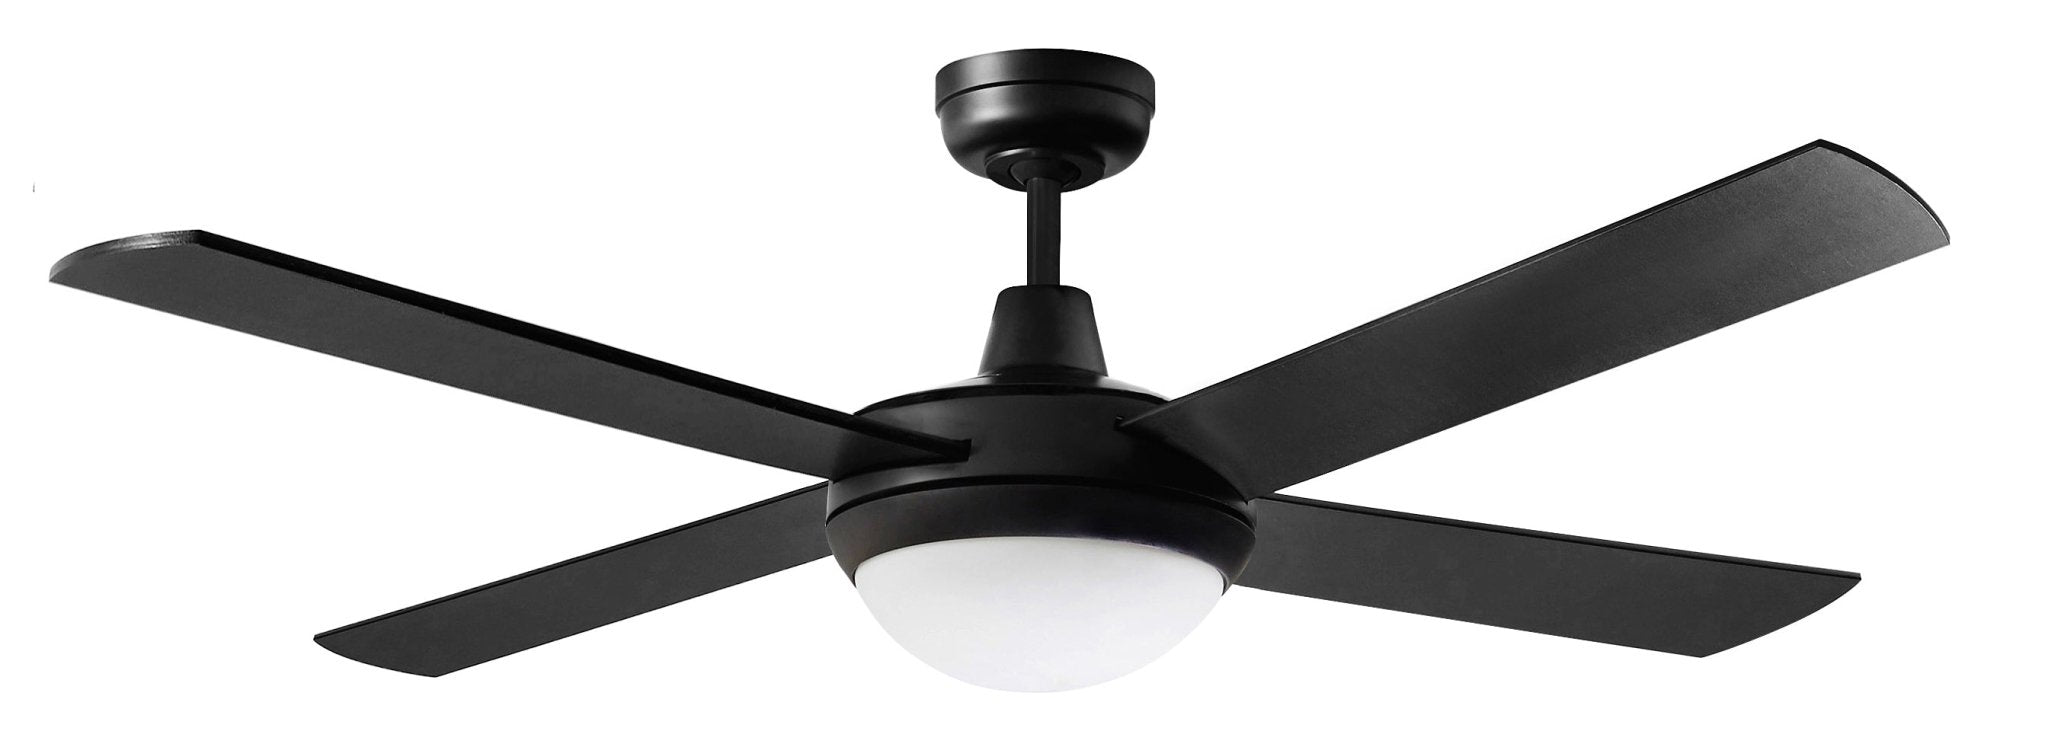 52" (1300mm) AC Ceiling Fan w/ 24w CCT LED Light Available in 3 Colours - Mases LightingMartec